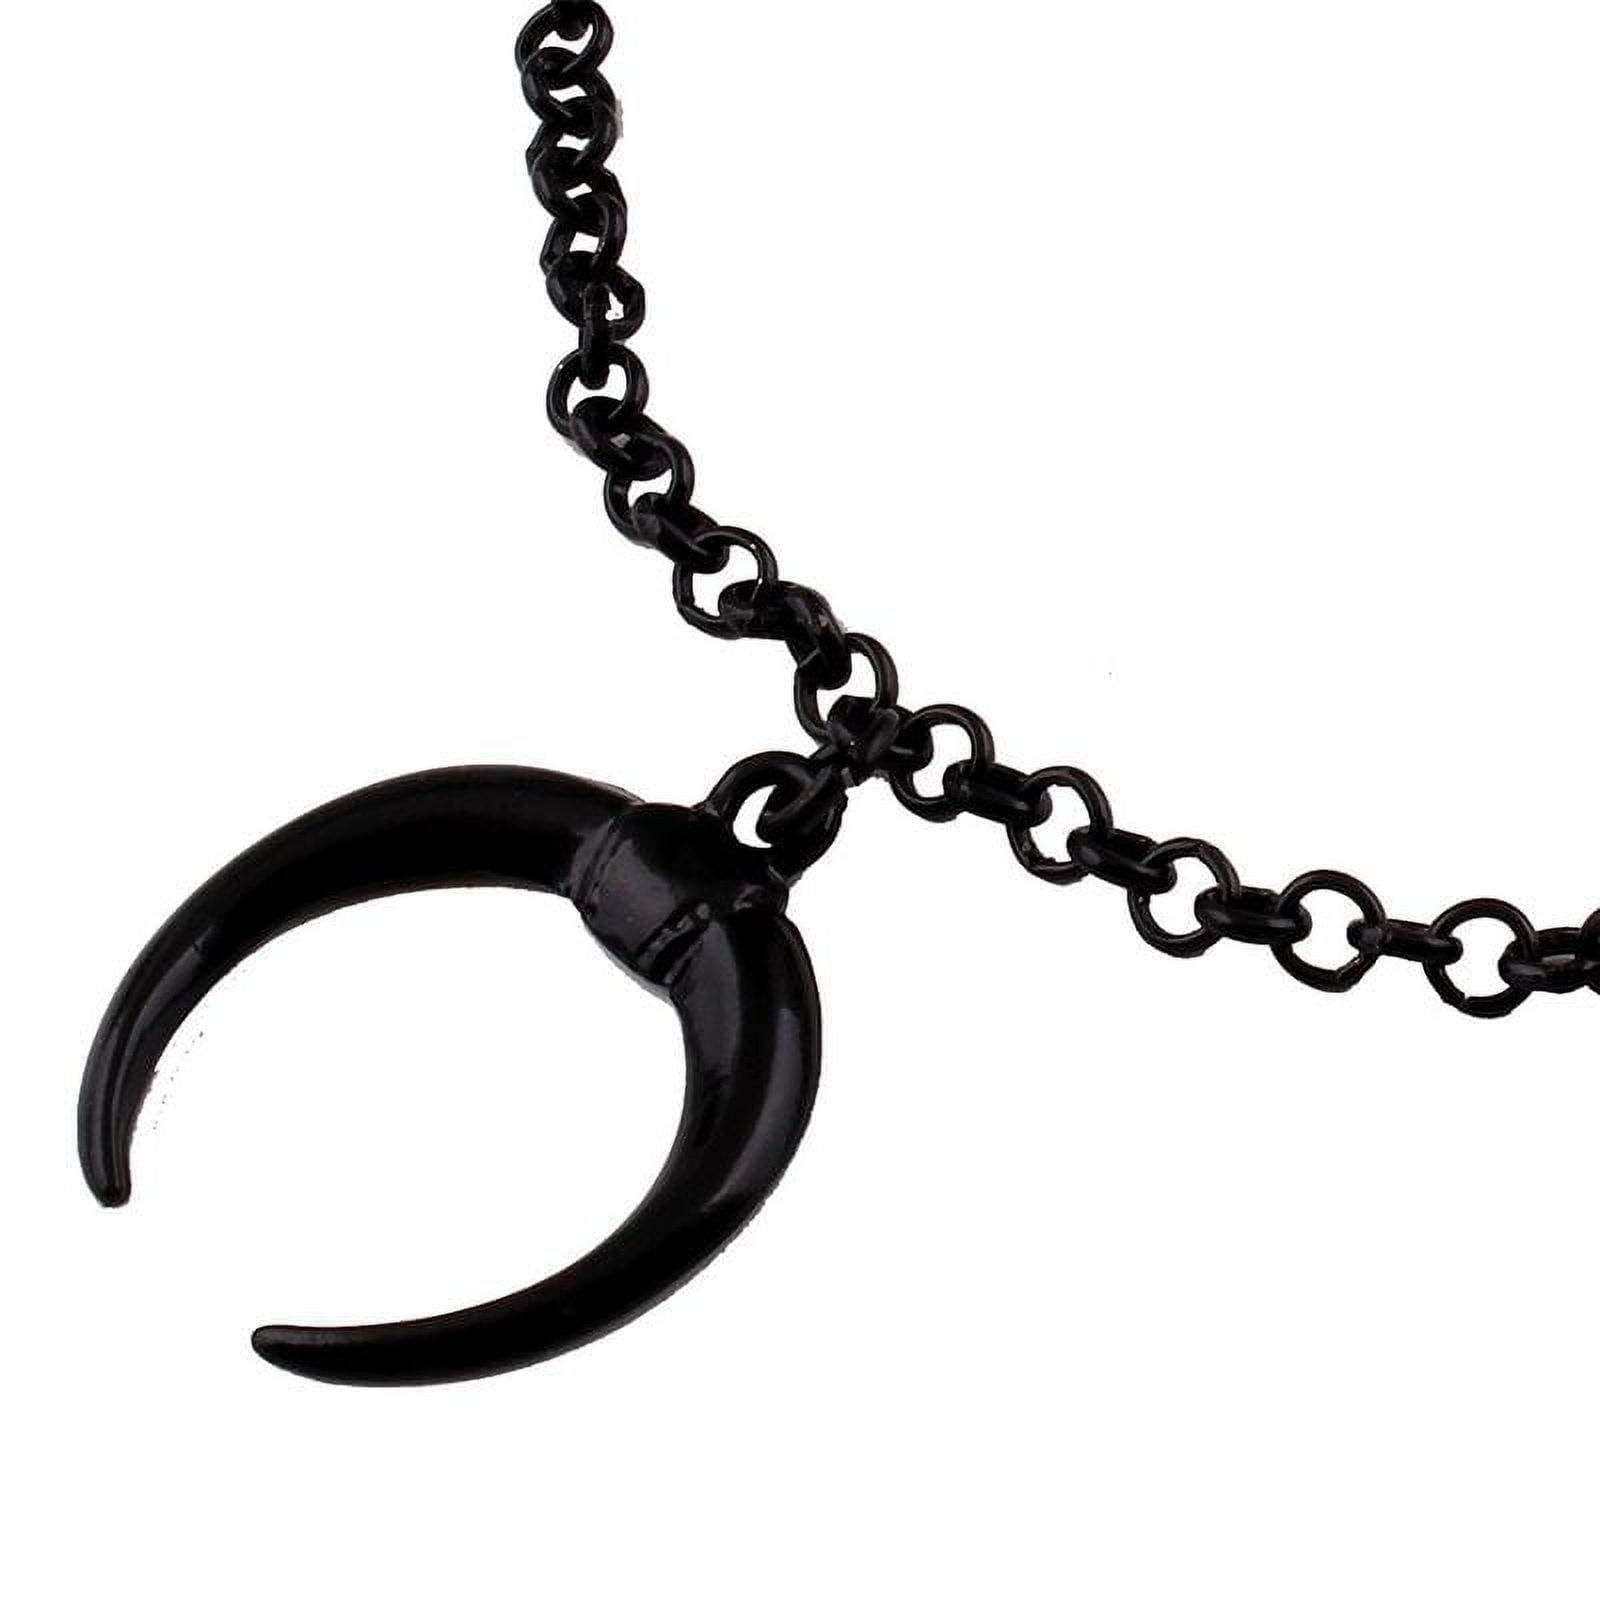 GXLYFG Moon Knight Necklace,Stainless Steel Mens India | Ubuy